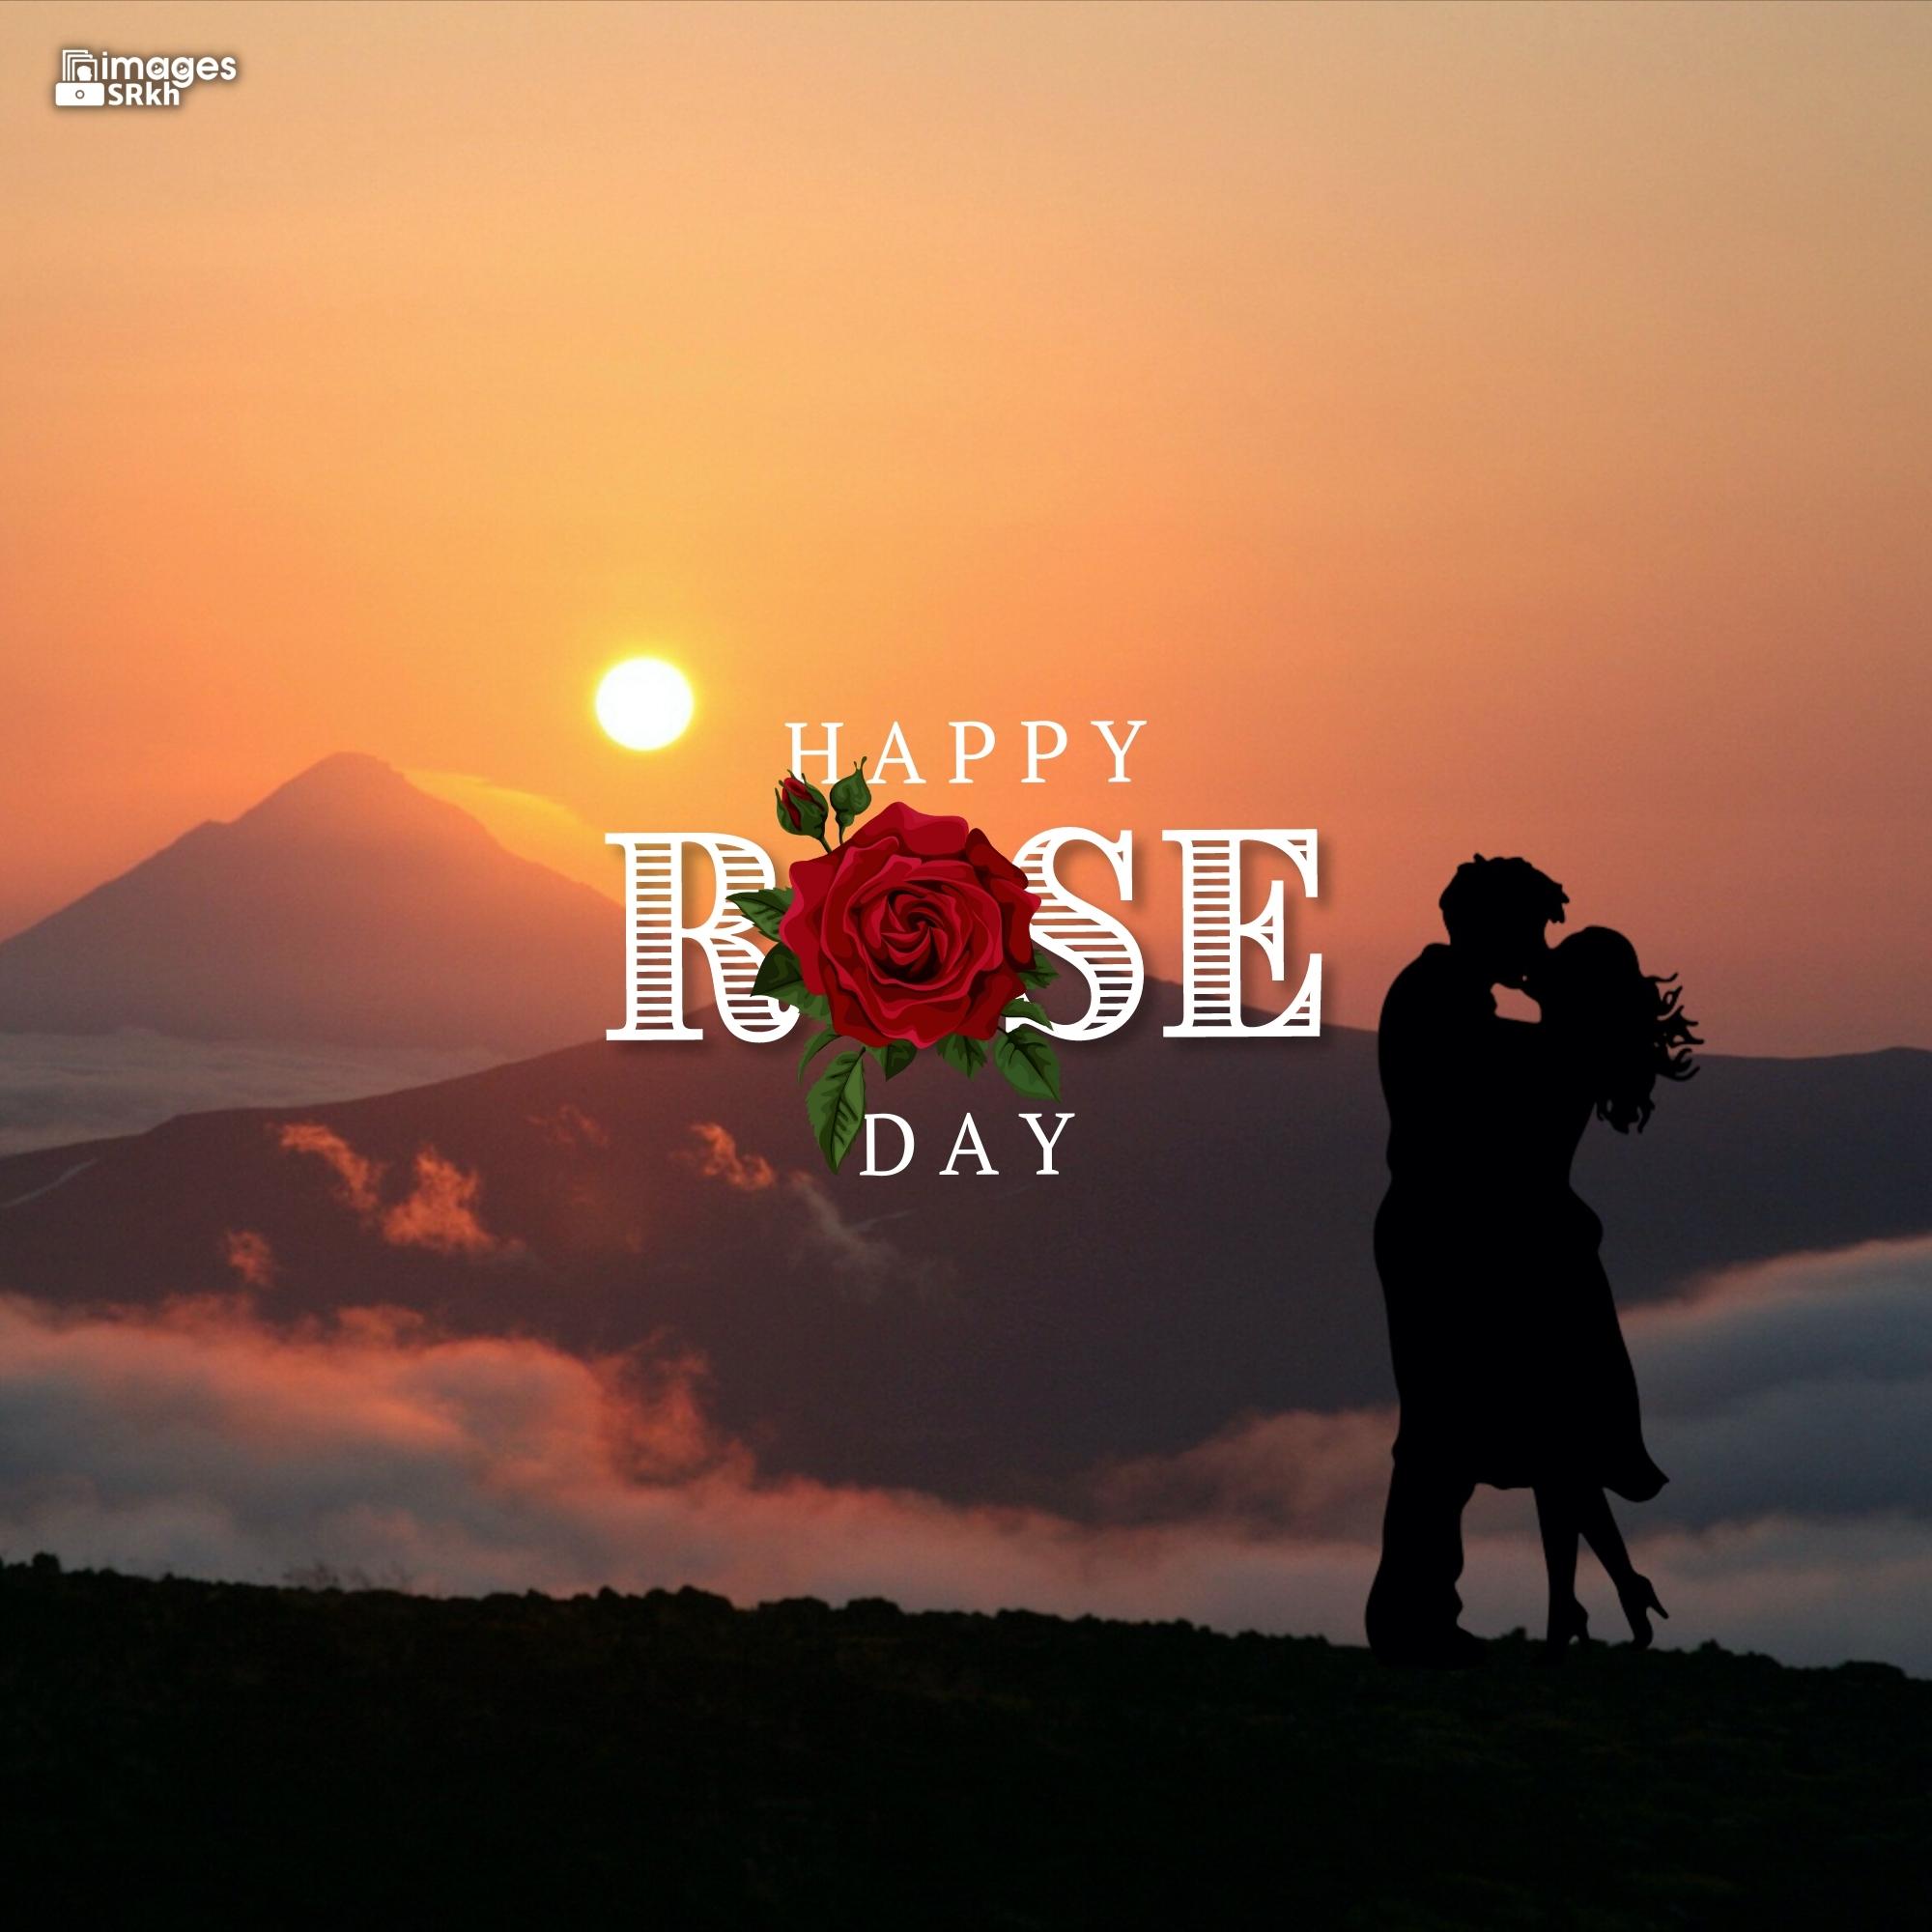 Romantic Rose Day Images Hd Download (9)